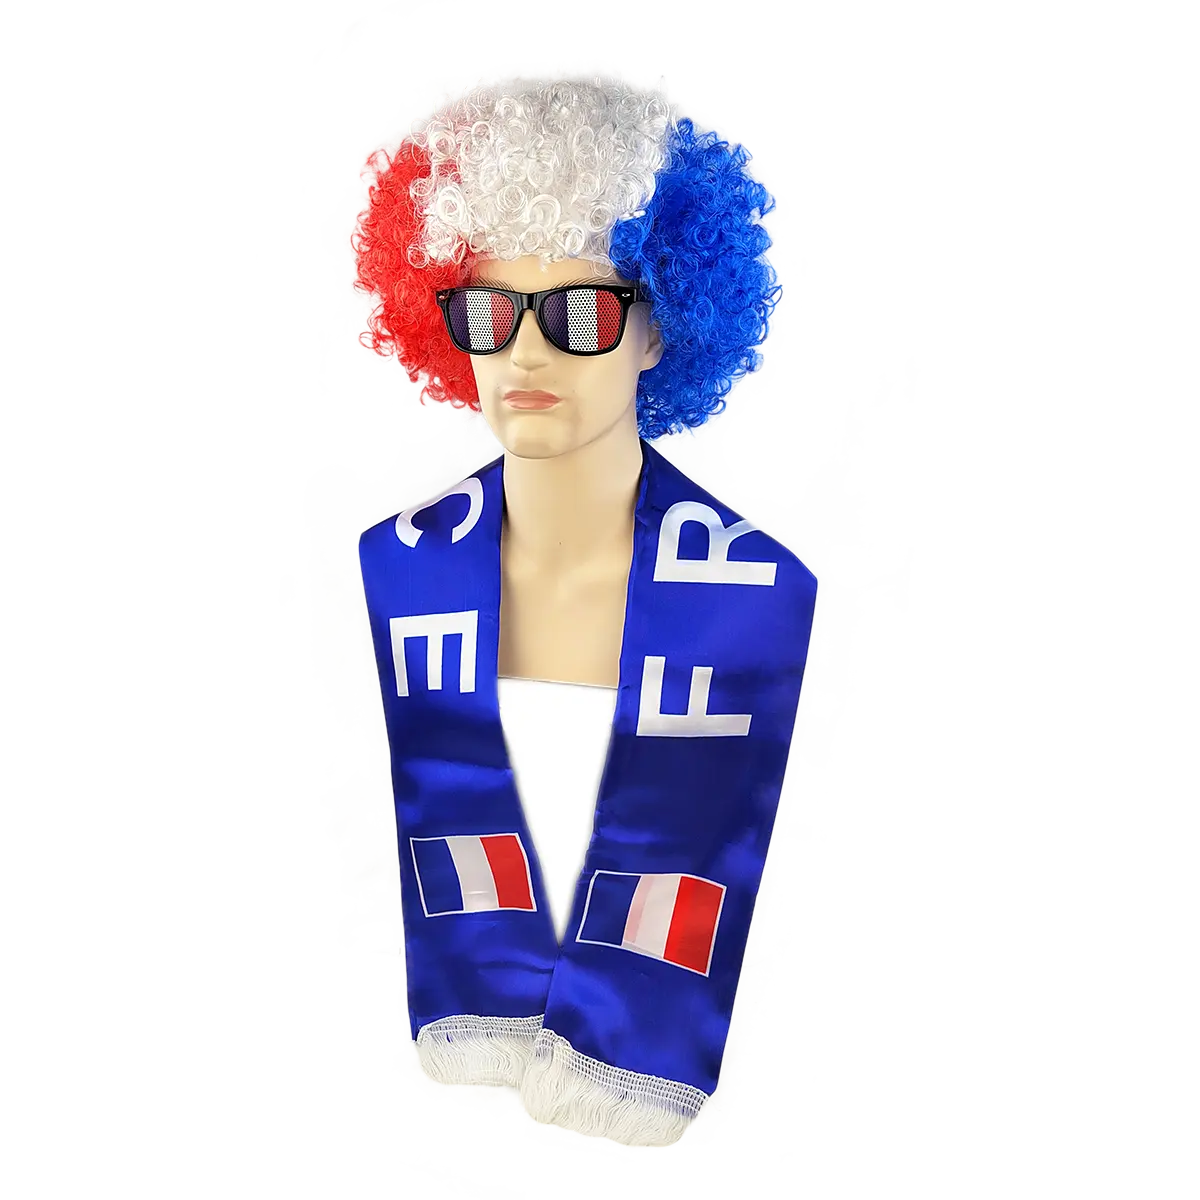 Flag colored fan Afro wig set, including wig, flag sunglasses, national team scarf for the football match